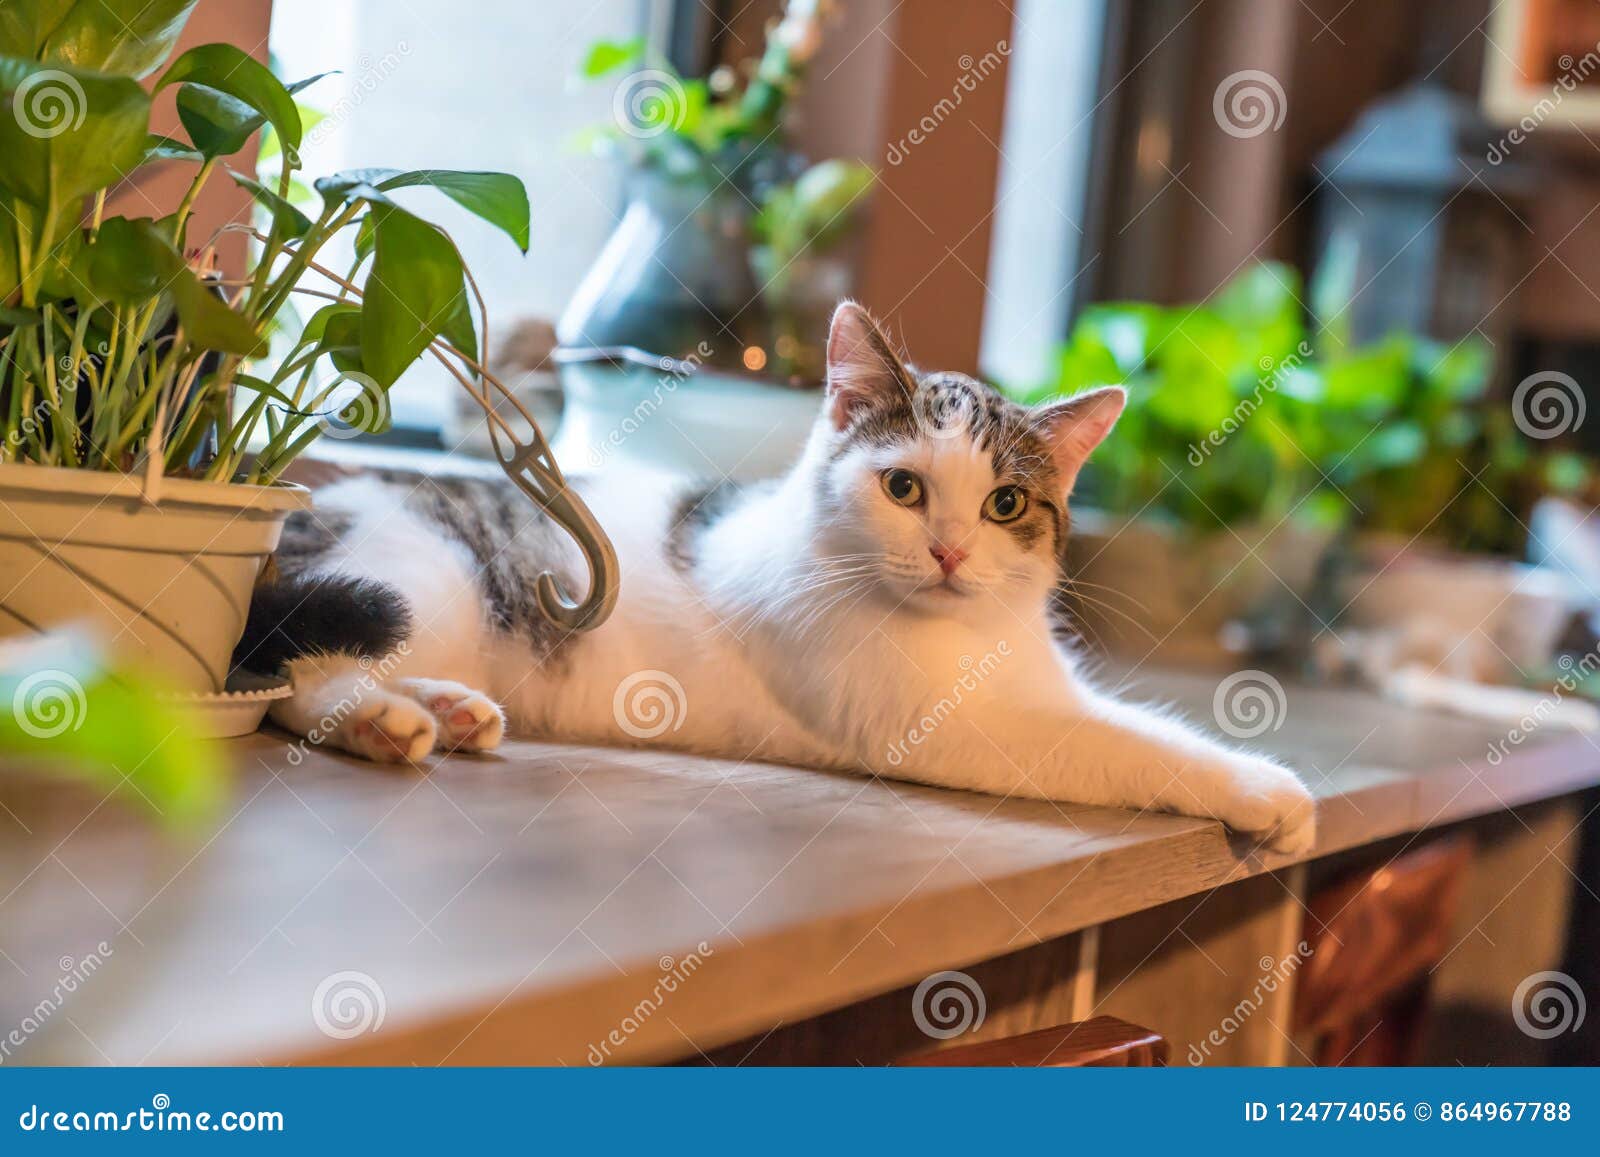 Cute and charming  cat  stock photo Image of mammals 